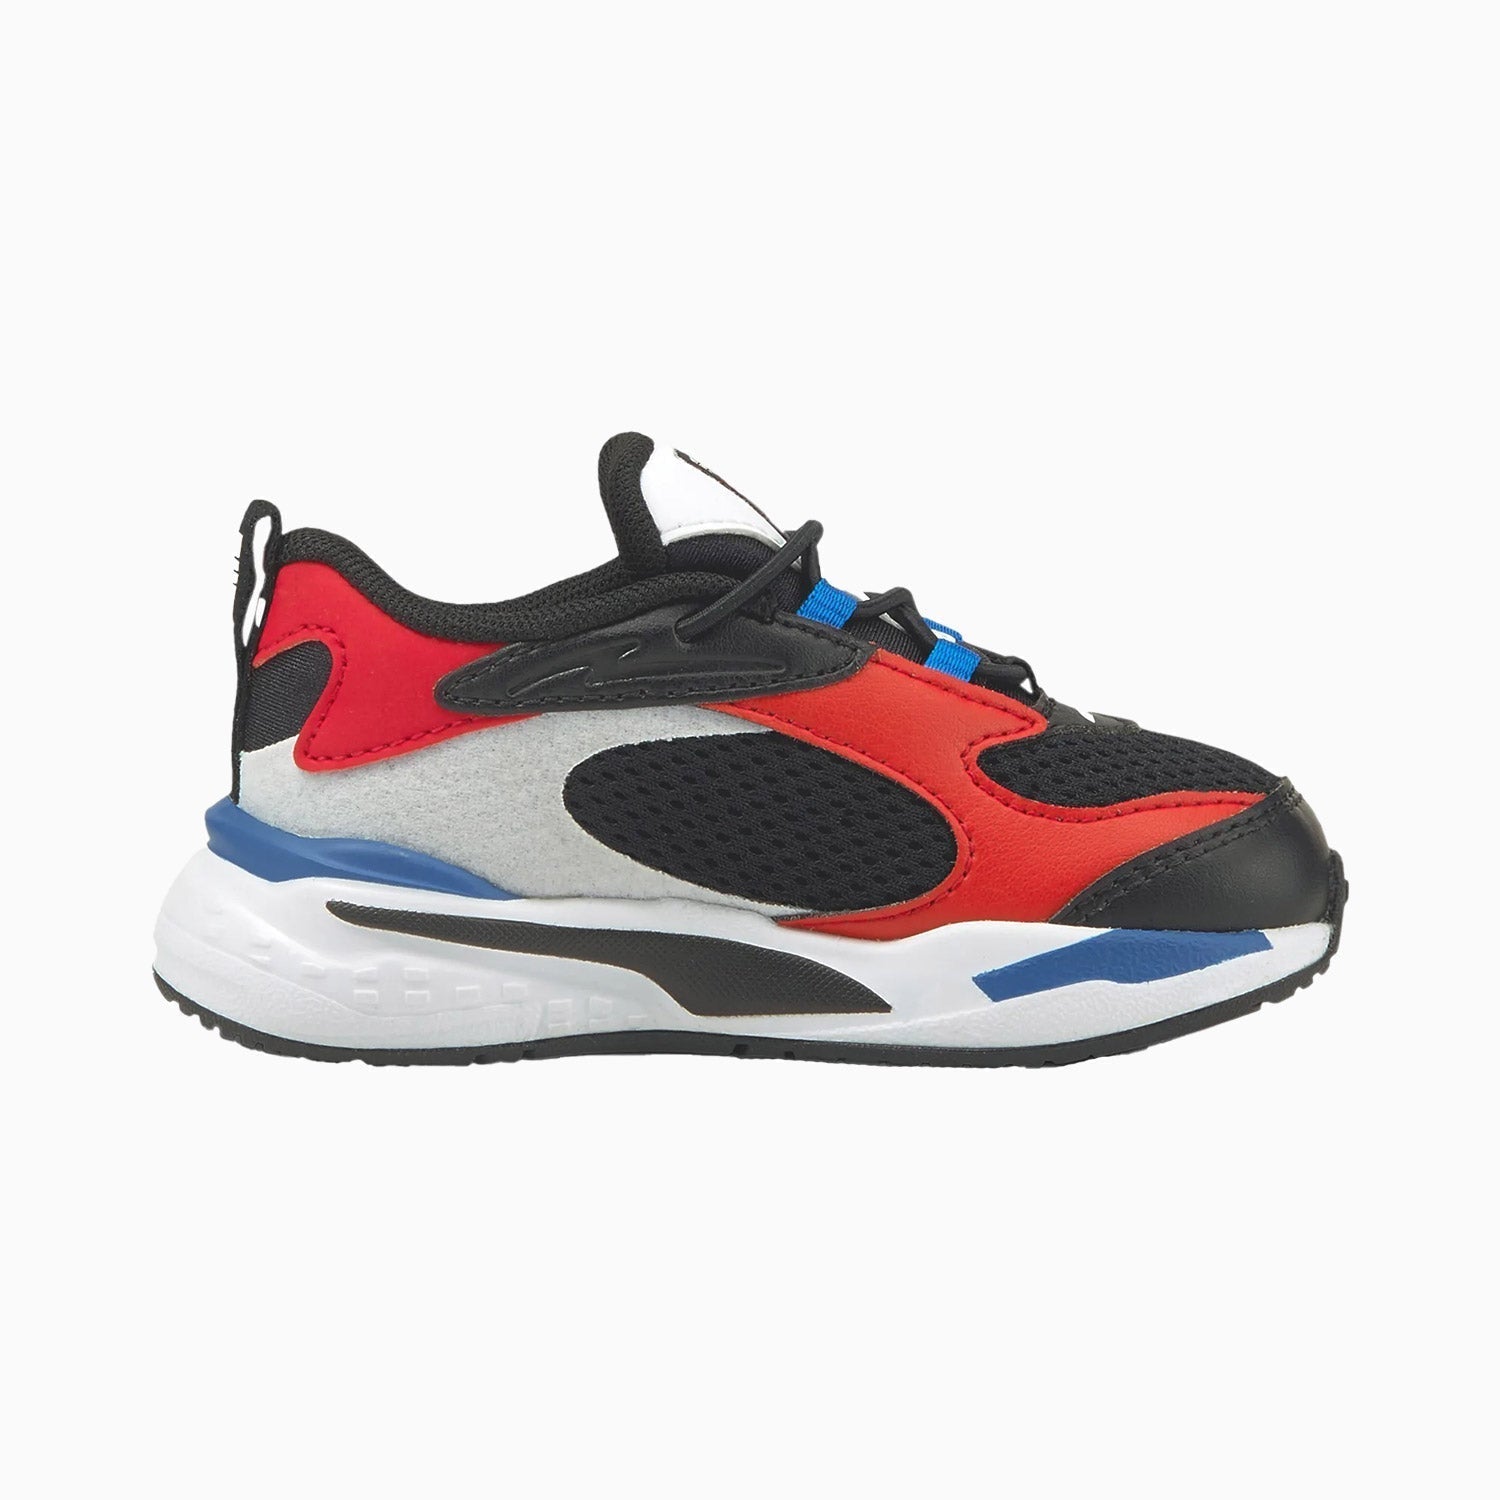 puma-kids-rs-fast-shoes-toddler-375699-10